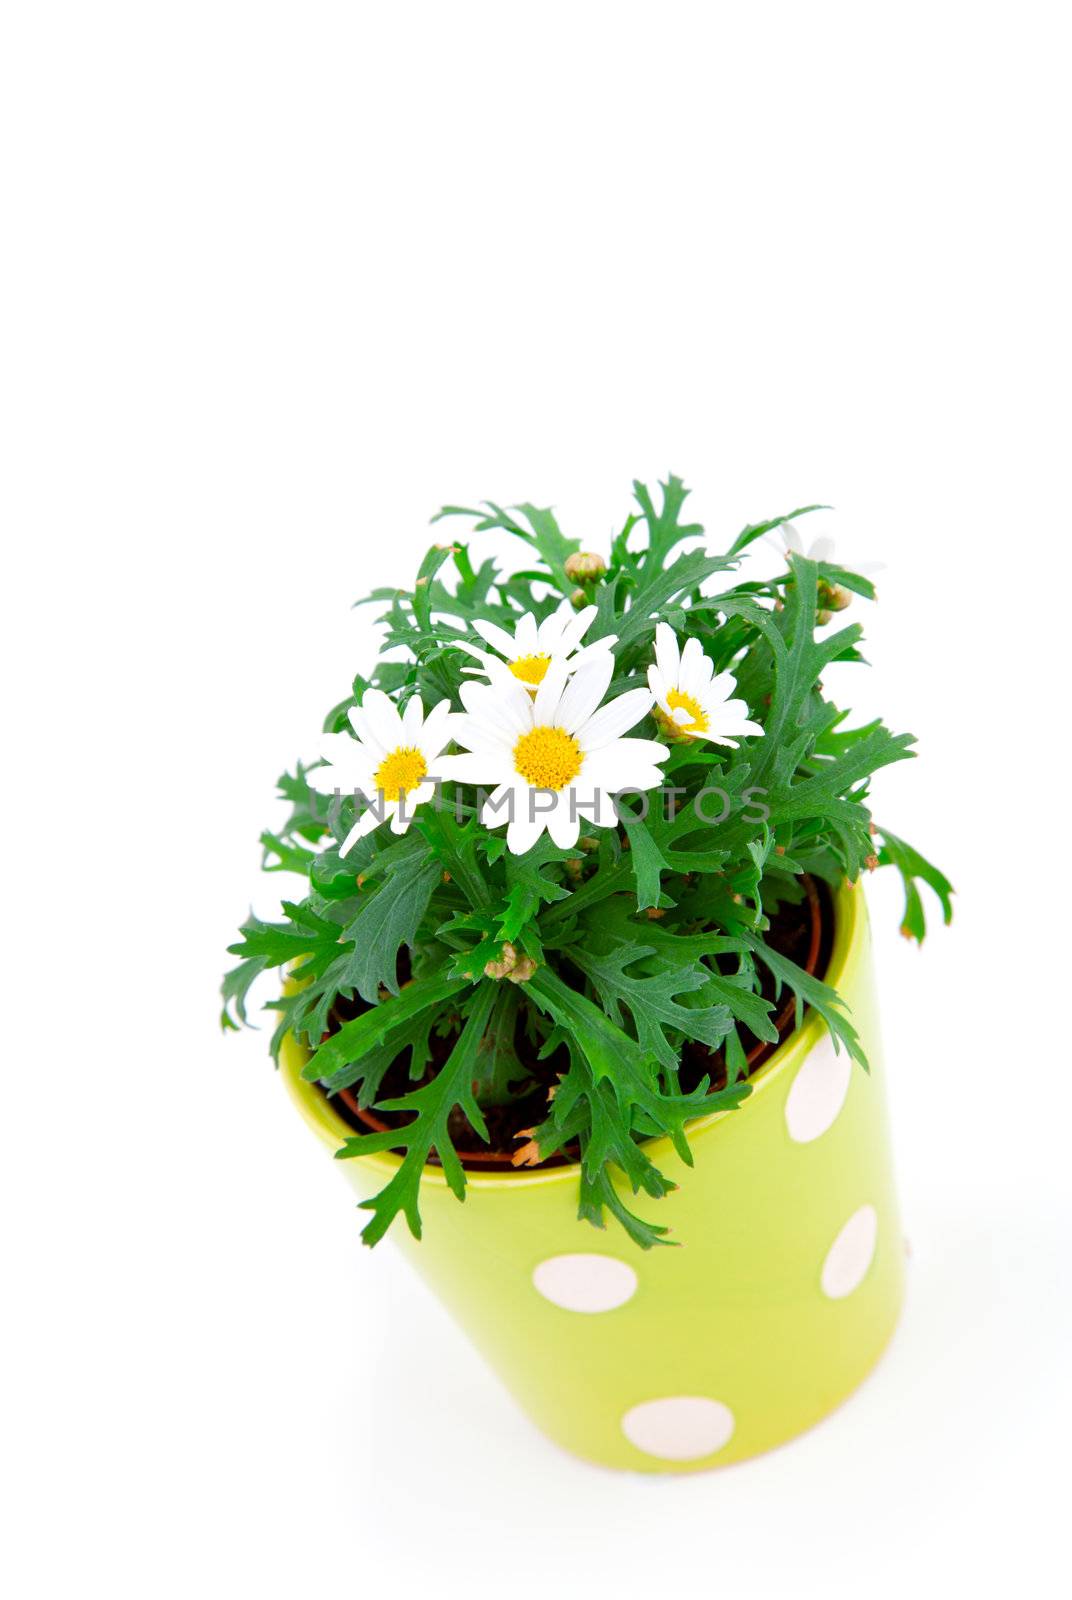 marguerite over a white background. by motorolka